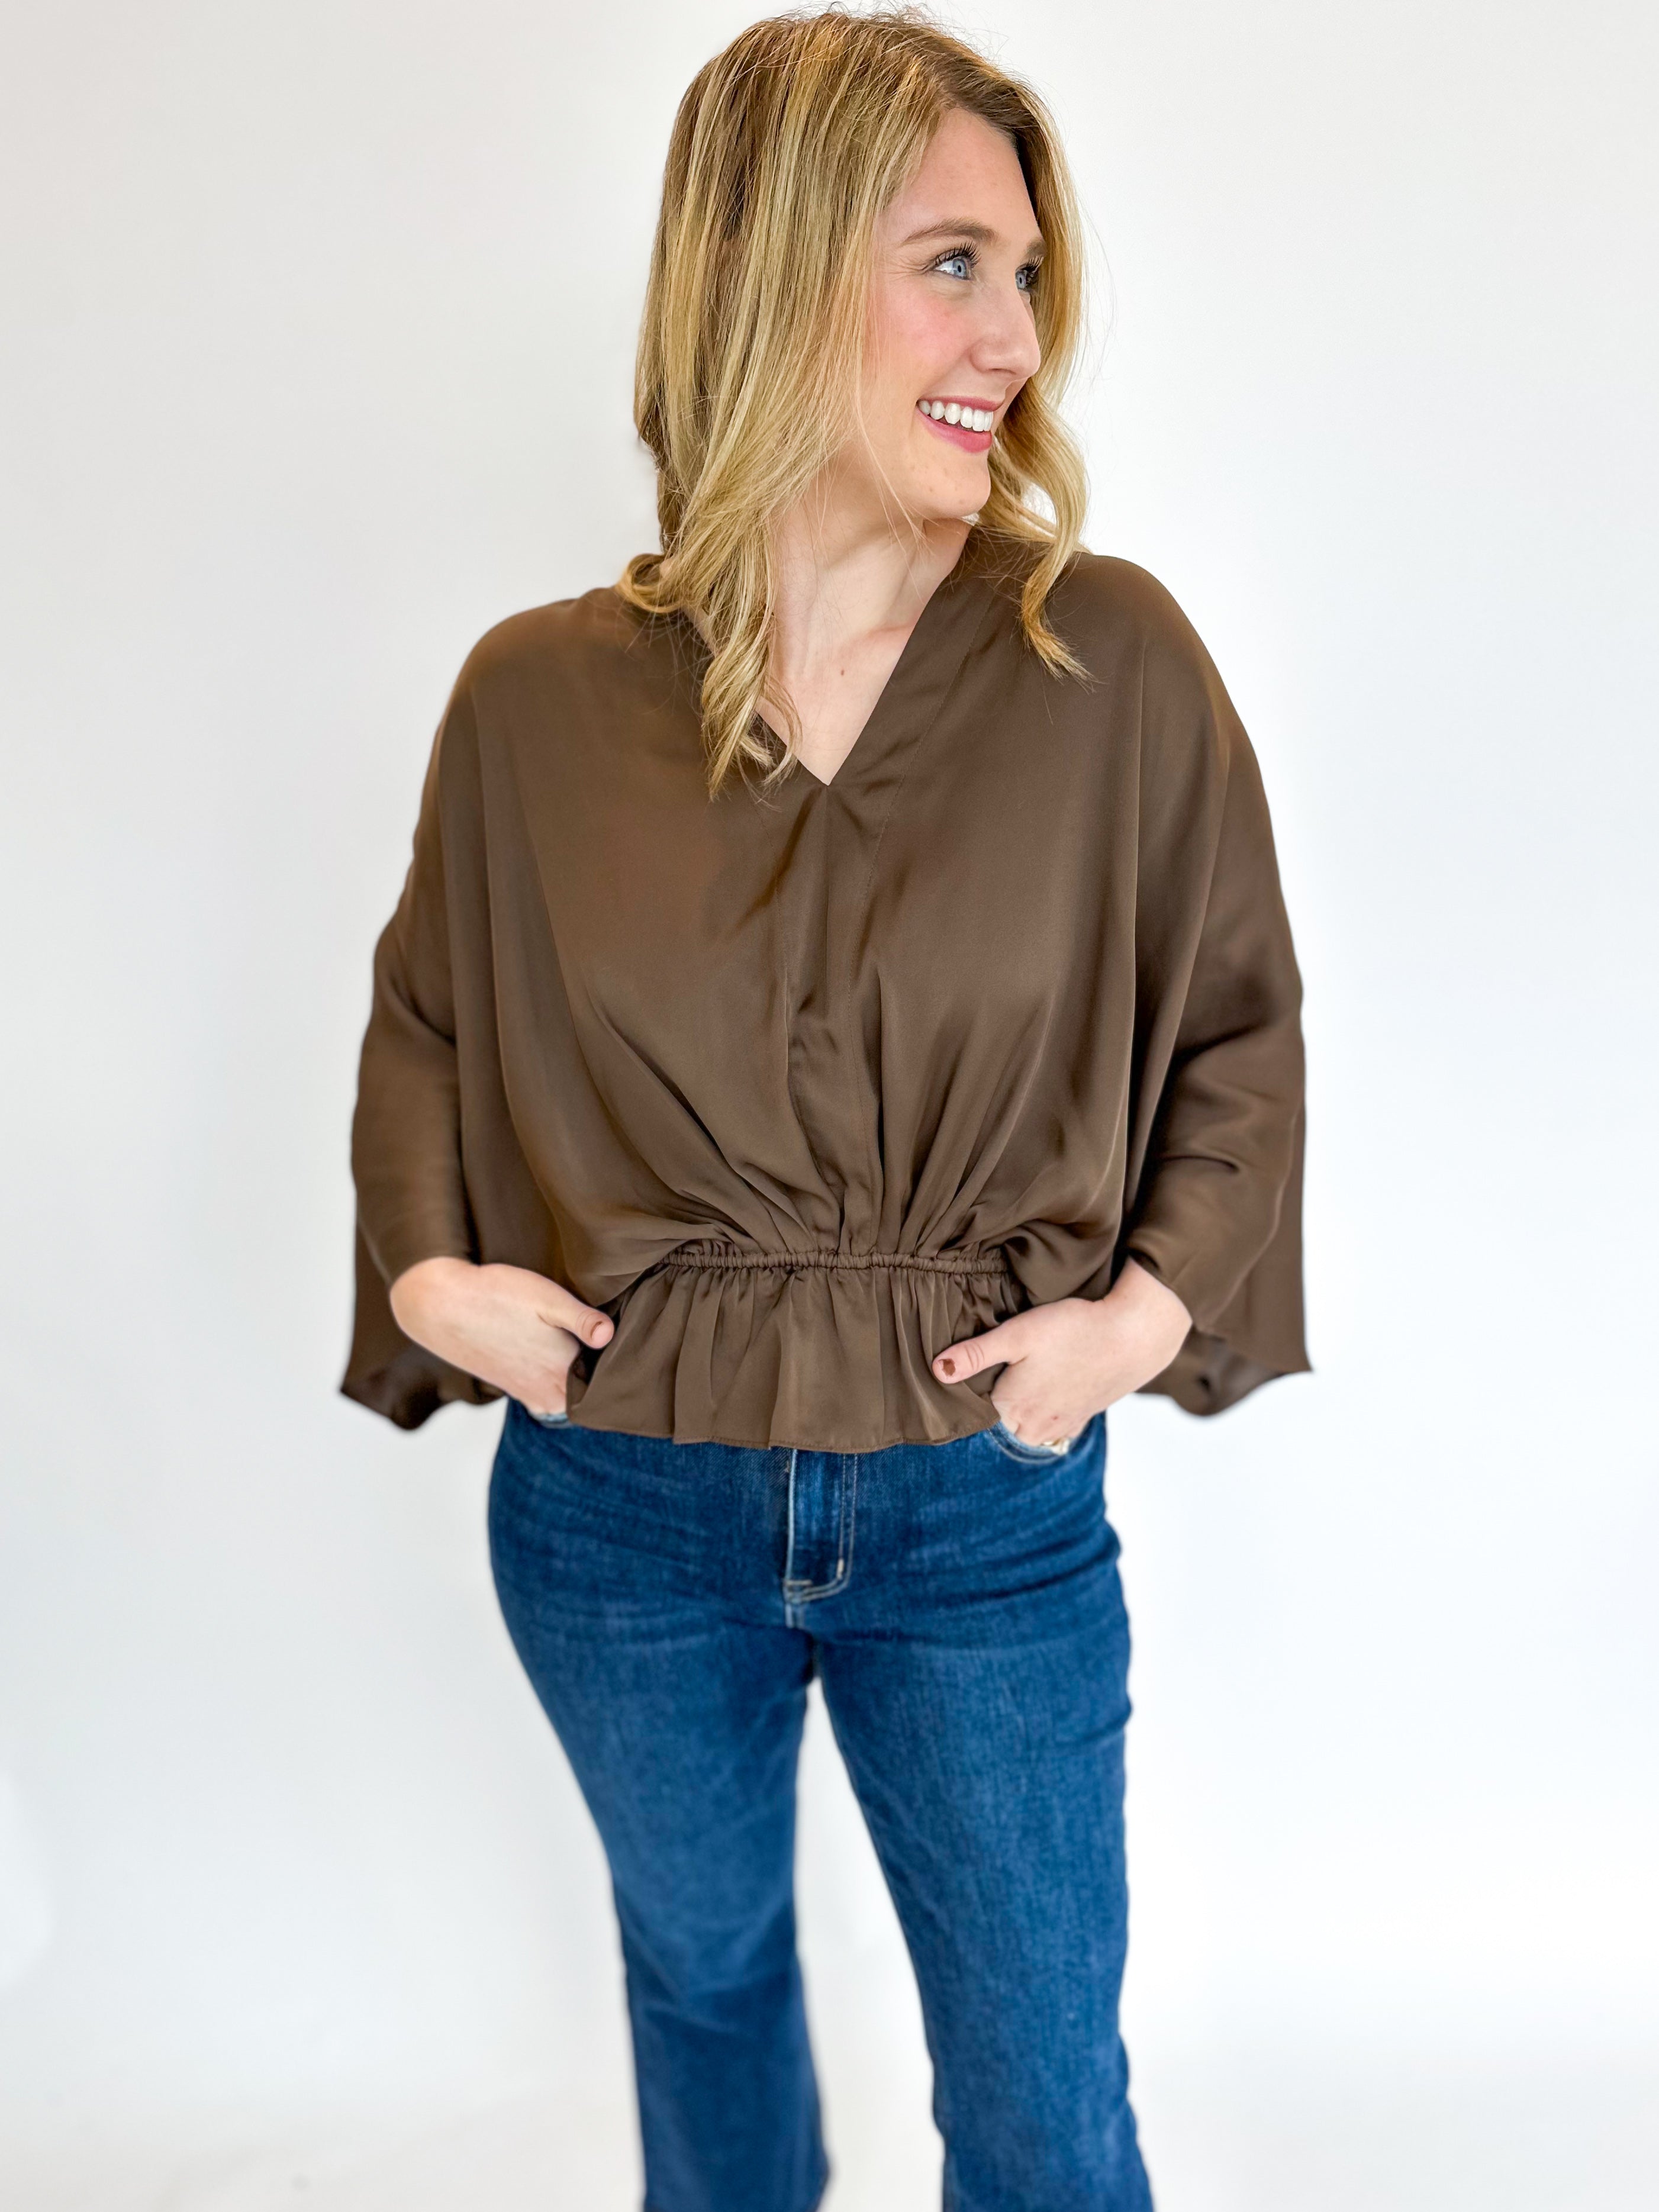 You're So Golden Blouse-200 Fashion Blouses-GRADE & GATHER-July & June Women's Fashion Boutique Located in San Antonio, Texas